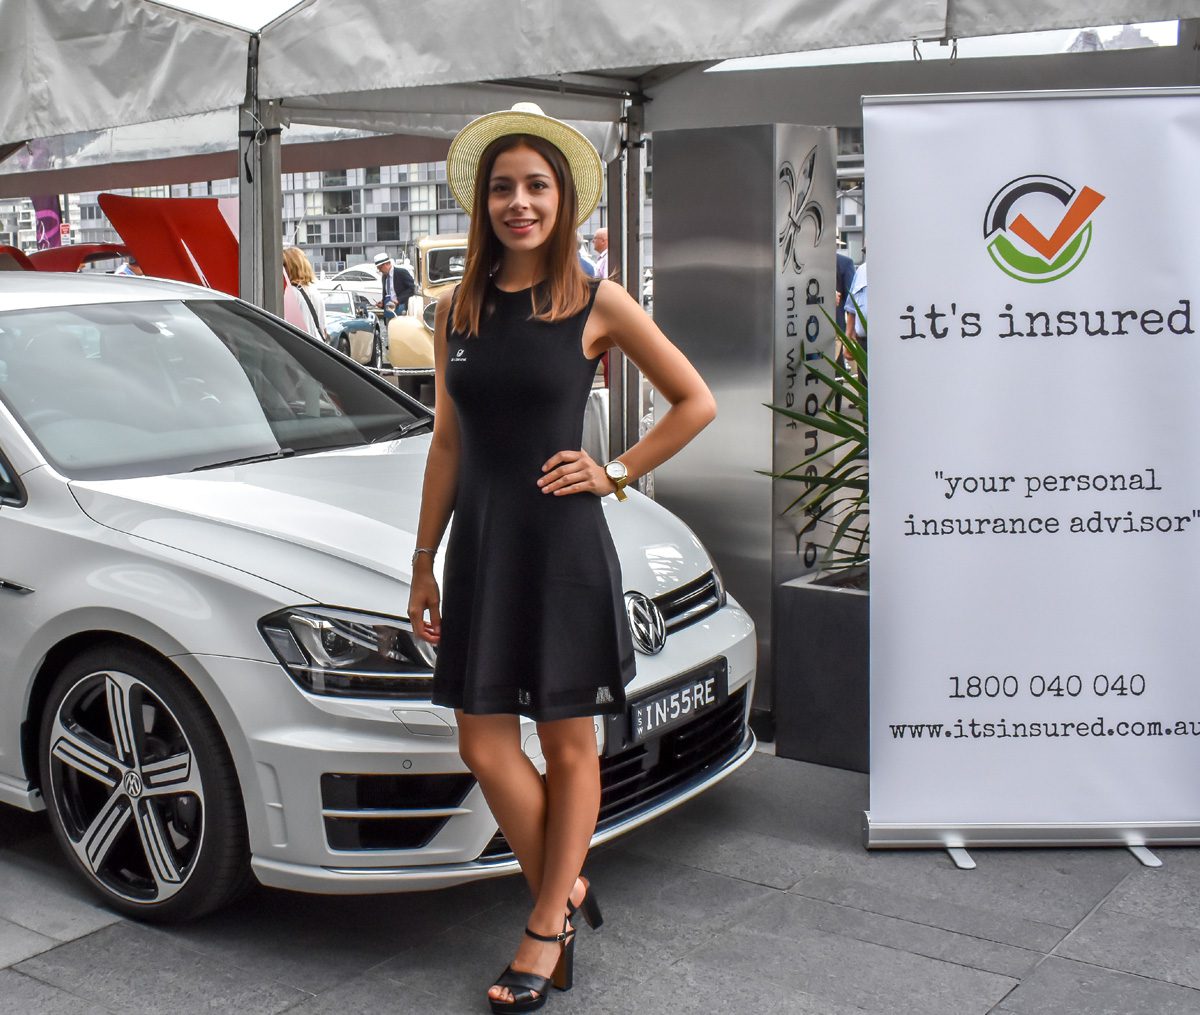 A promotional model posing with a white car